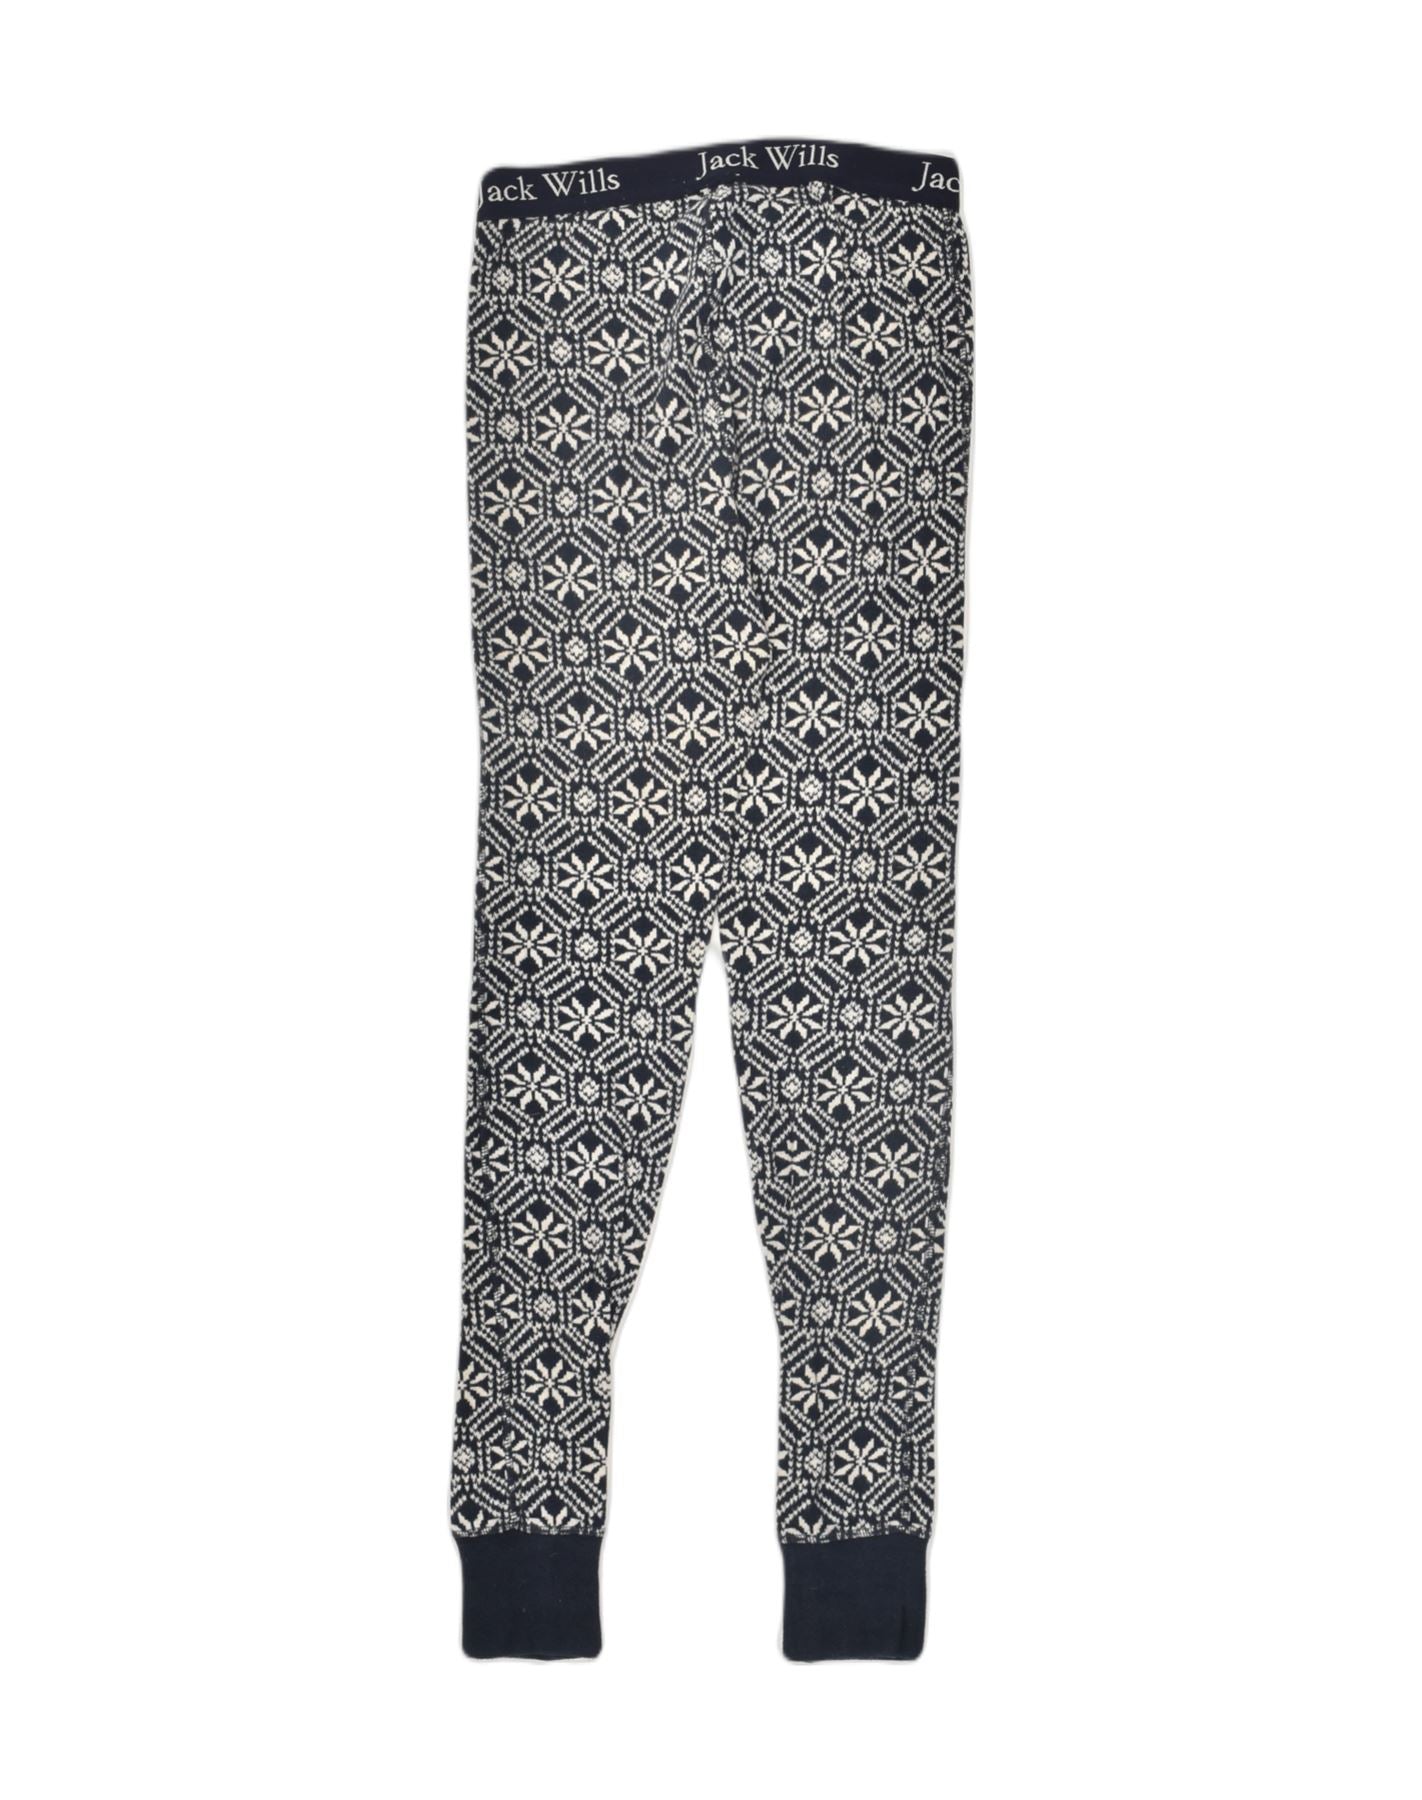 JACK WILLS Womens Leggings UK 8 Small Navy Blue Fair Isle Cotton, Vintage  & Second-Hand Clothing Online